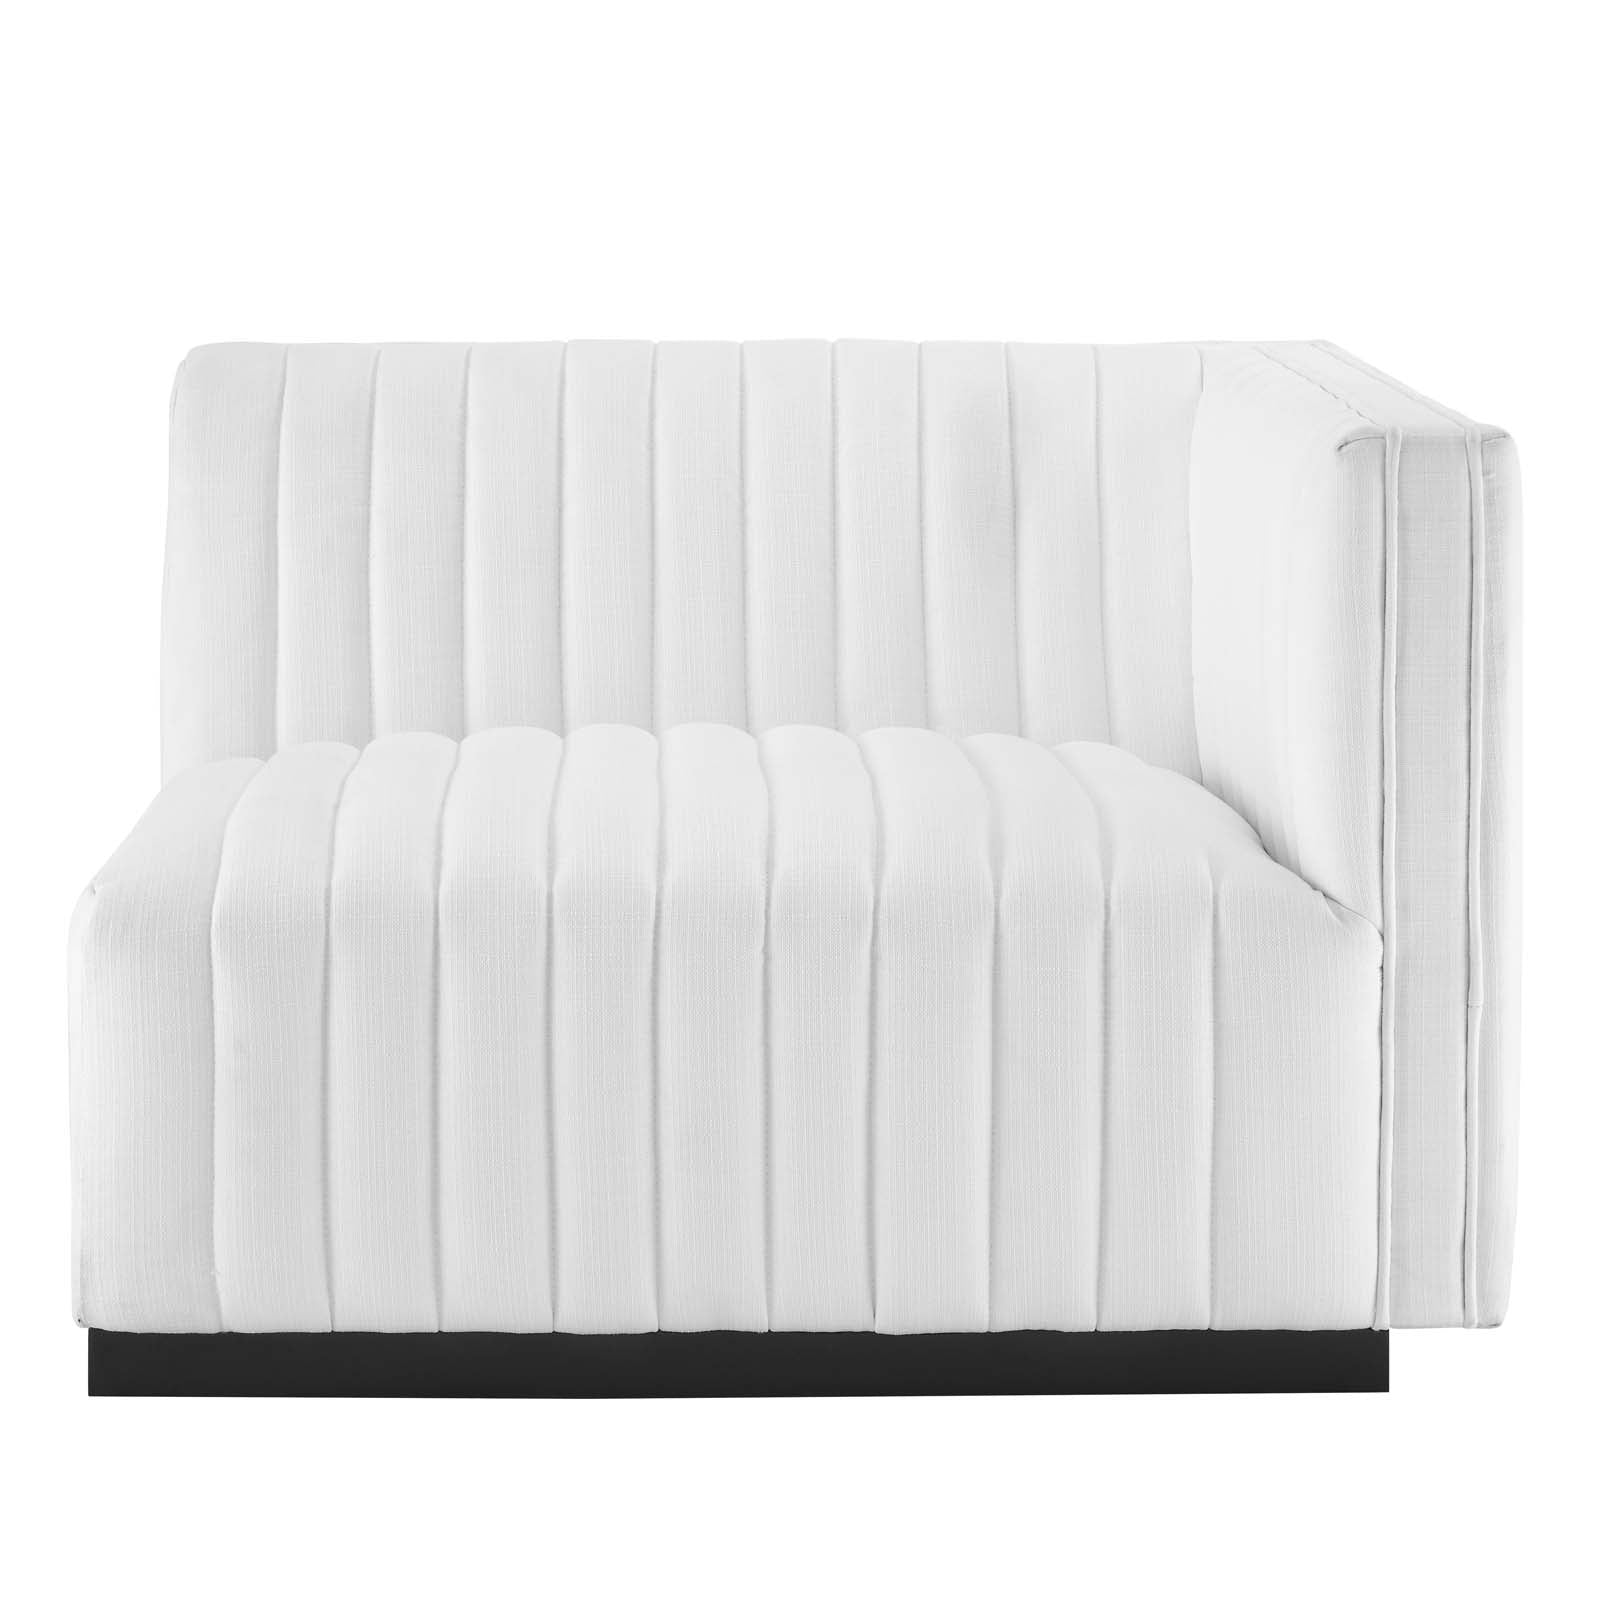 Modway Sectional Sofas - Conjure Channel Tufted Upholstered Fabric 5-Piece 119 " L Sectional Black White